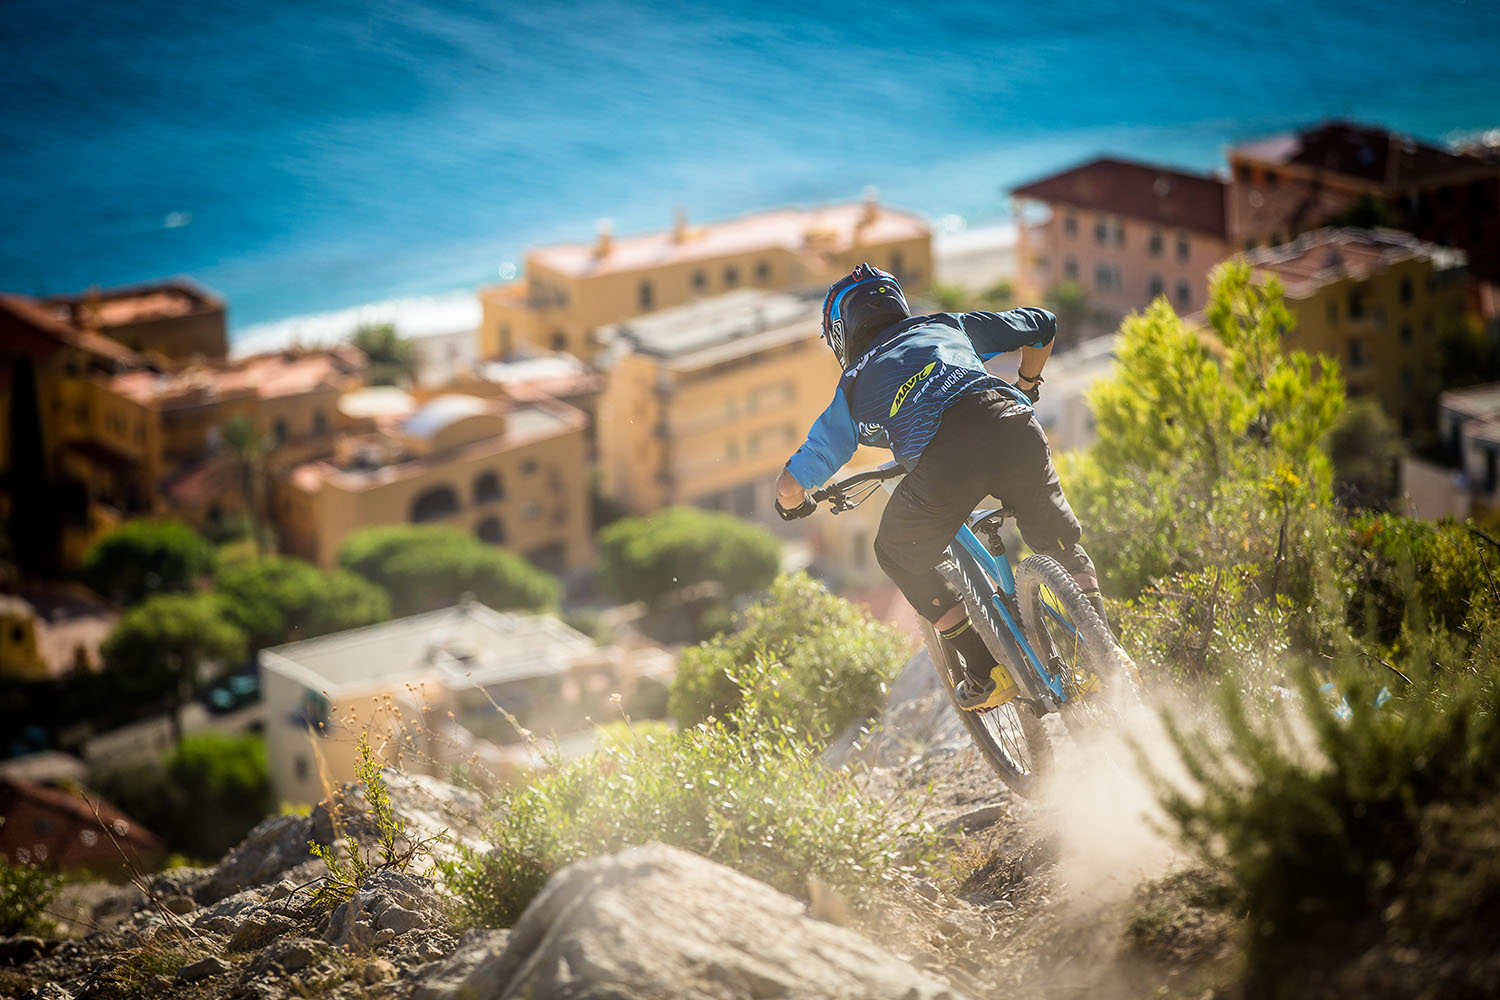 Canyon’s EWS team riders had a lot of input into developing the Strive